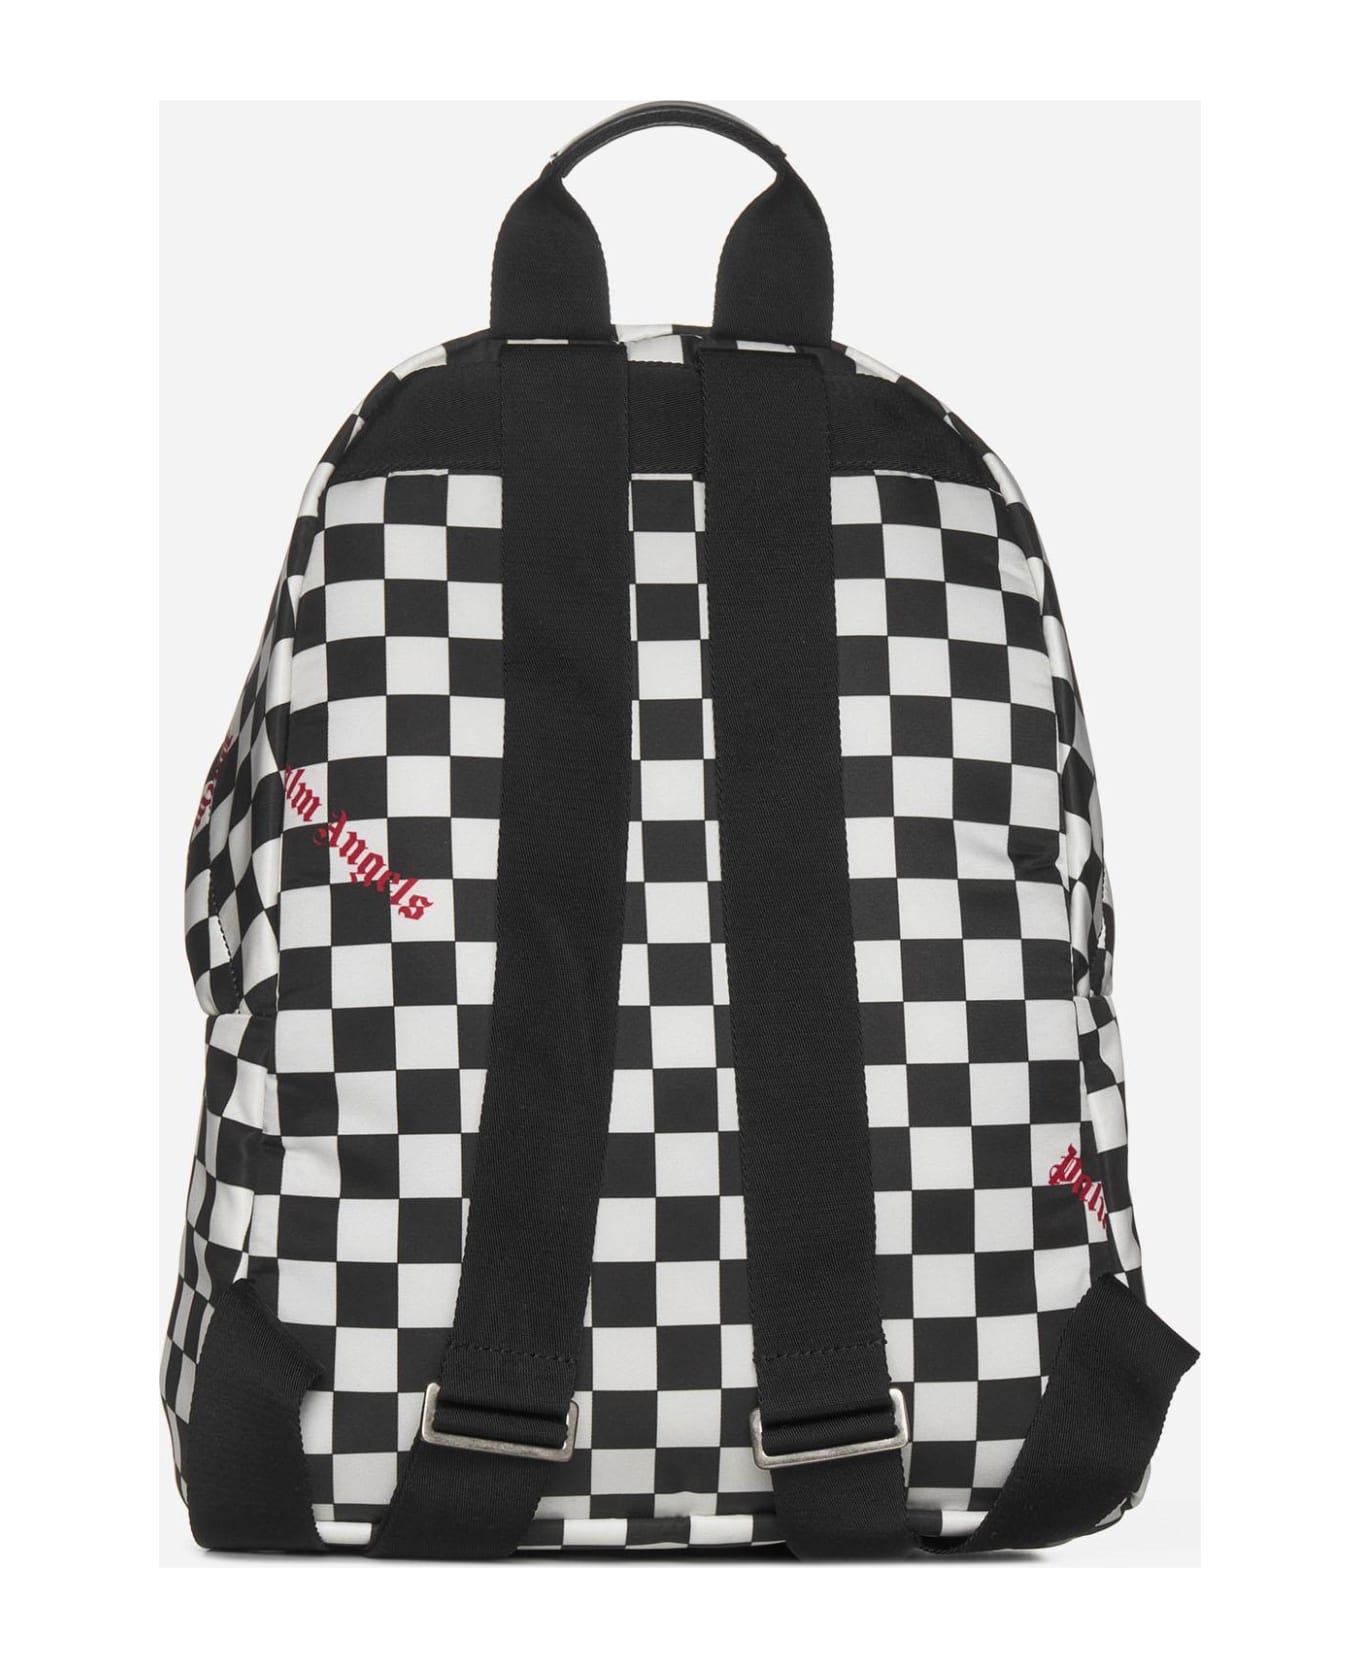 Palm Angels Check Print Nylon Backpack バックパック